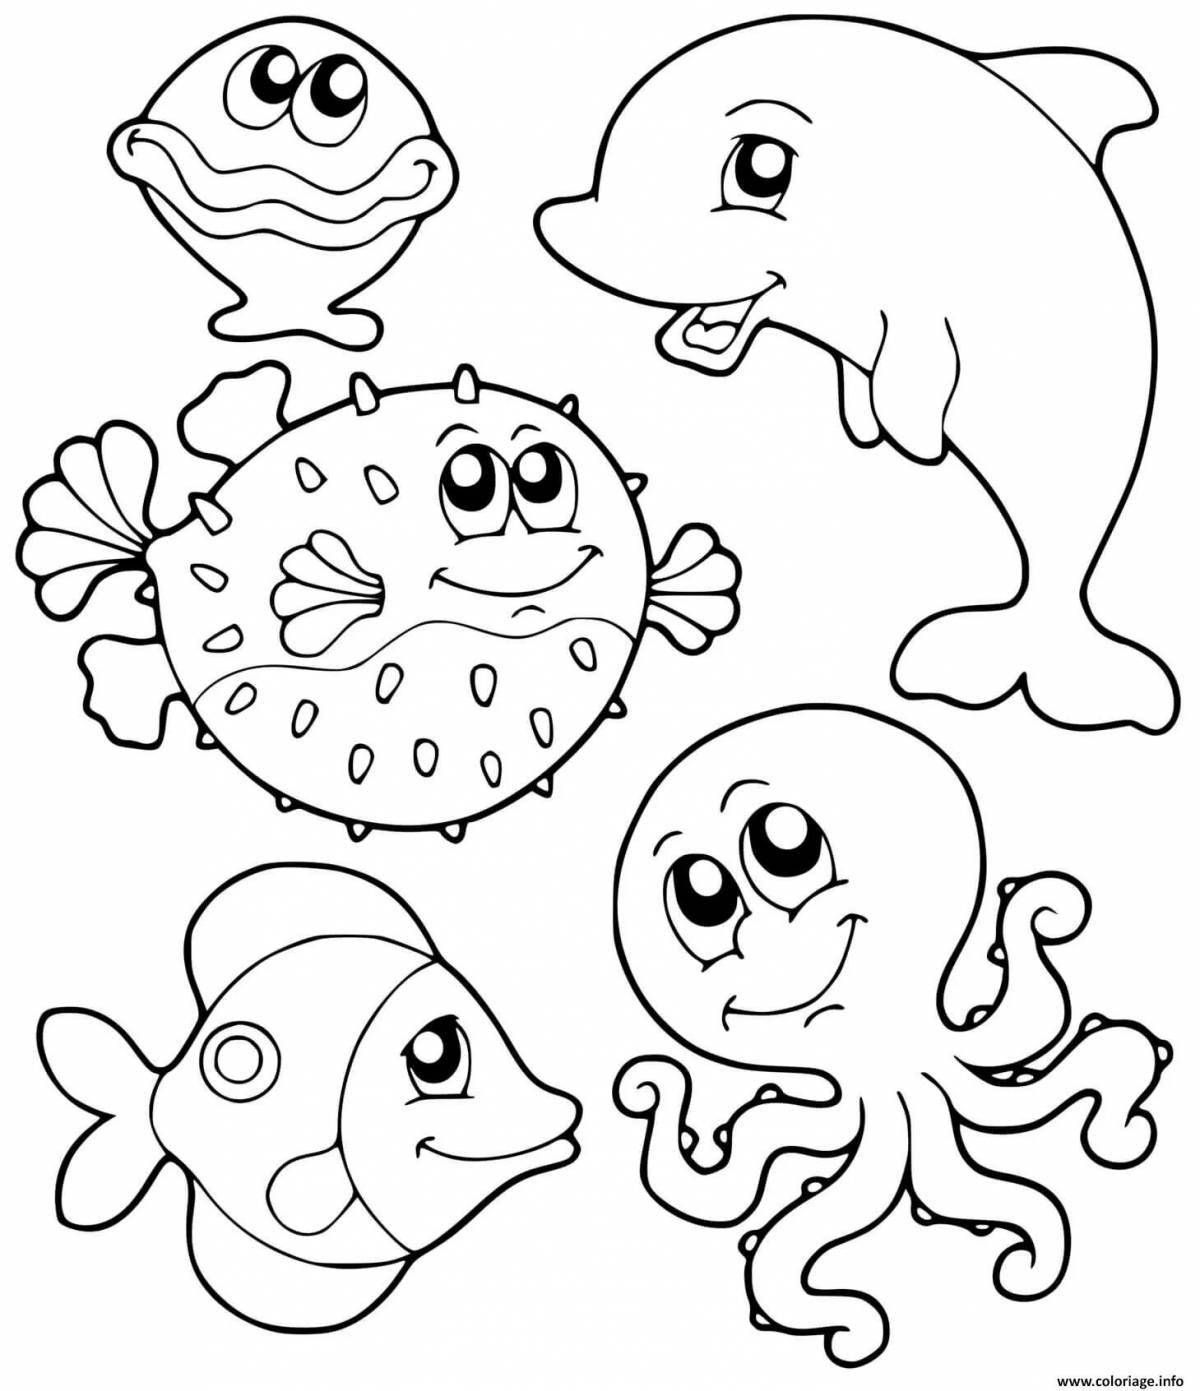 Bizarre marine life coloring book for 3-4 year olds